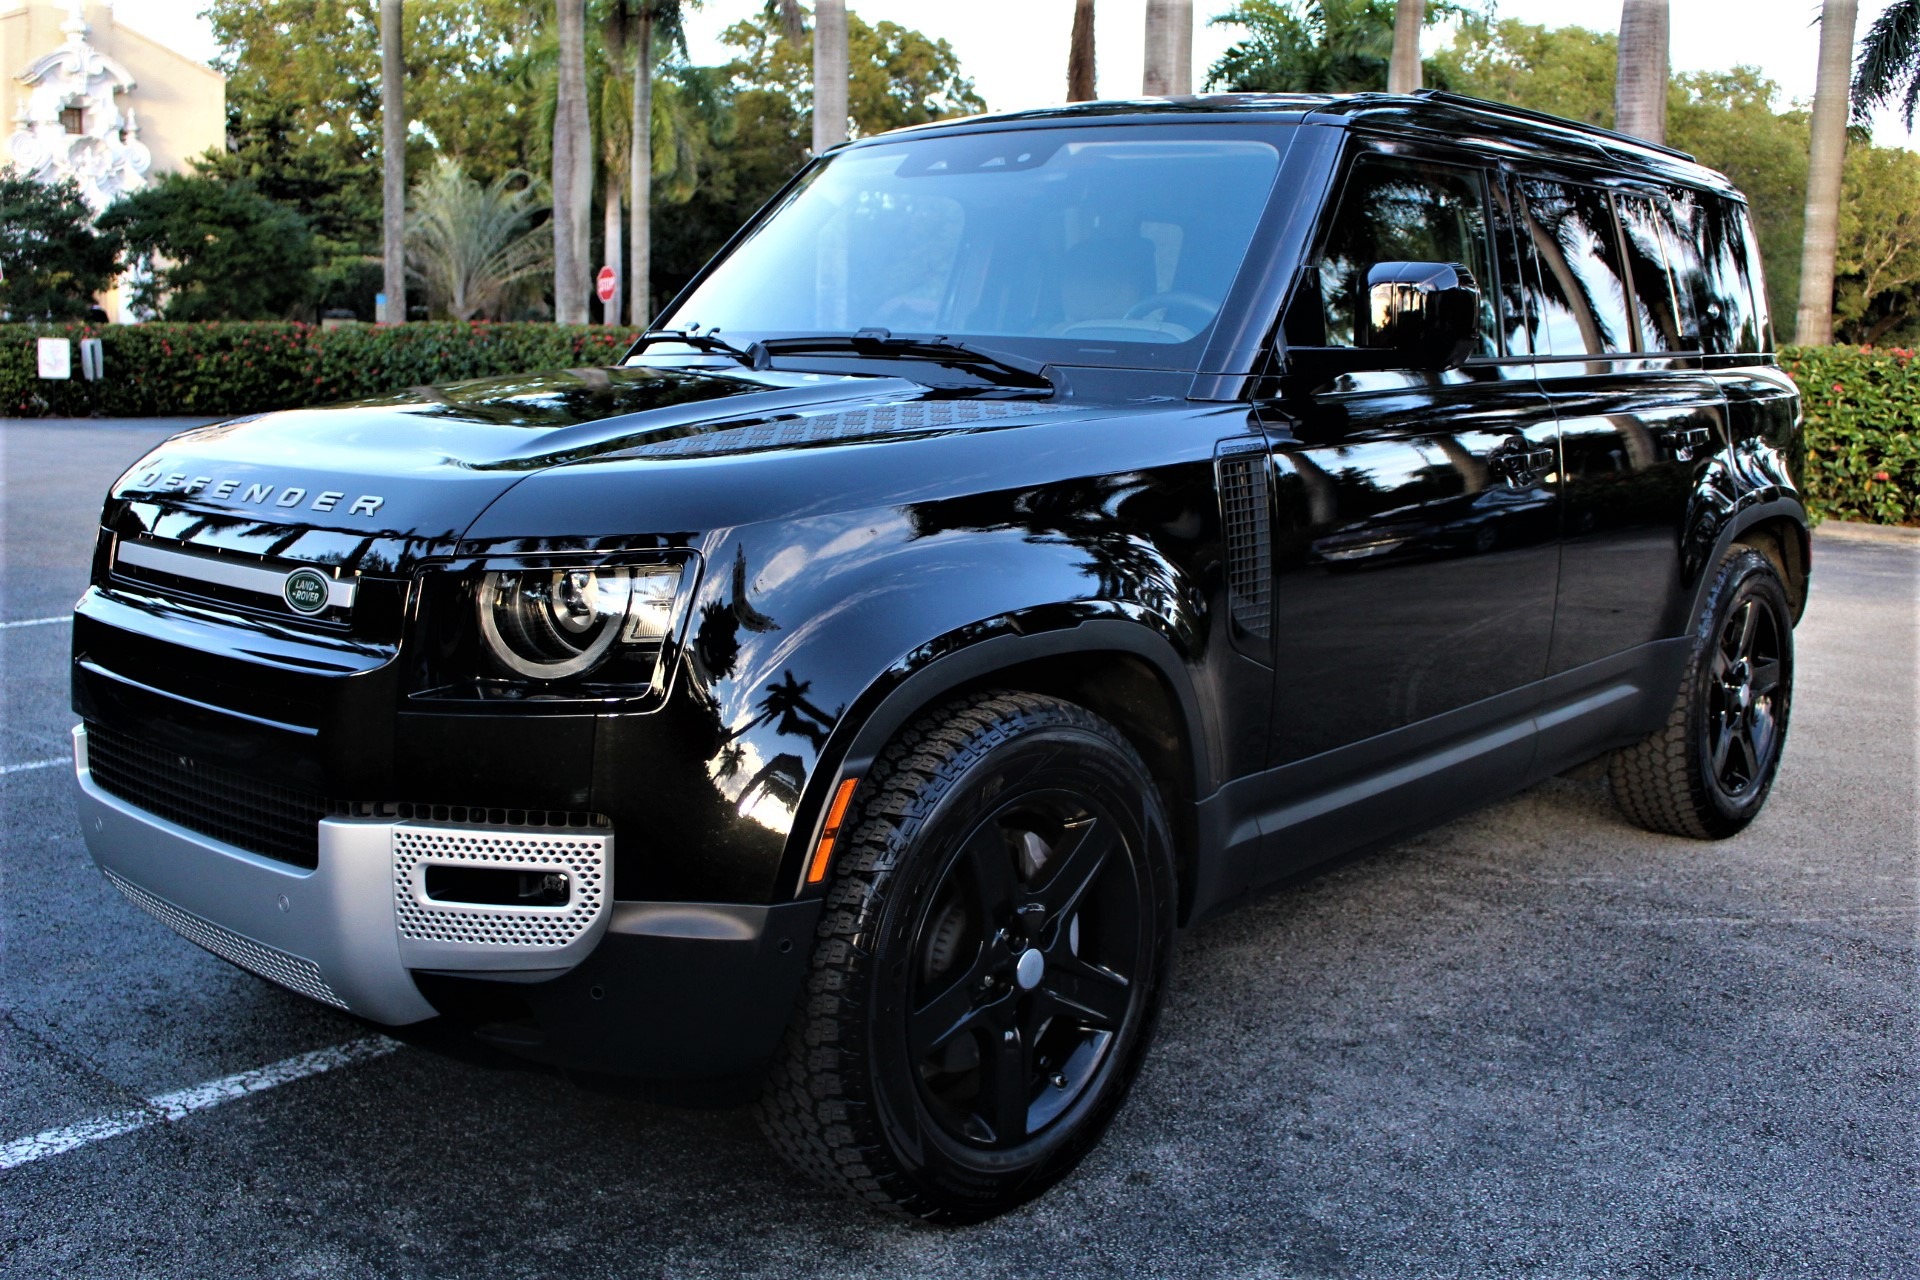 Used 2020 Land Rover Defender 110 First Edition for sale Sold at The Gables Sports Cars in Miami FL 33146 3